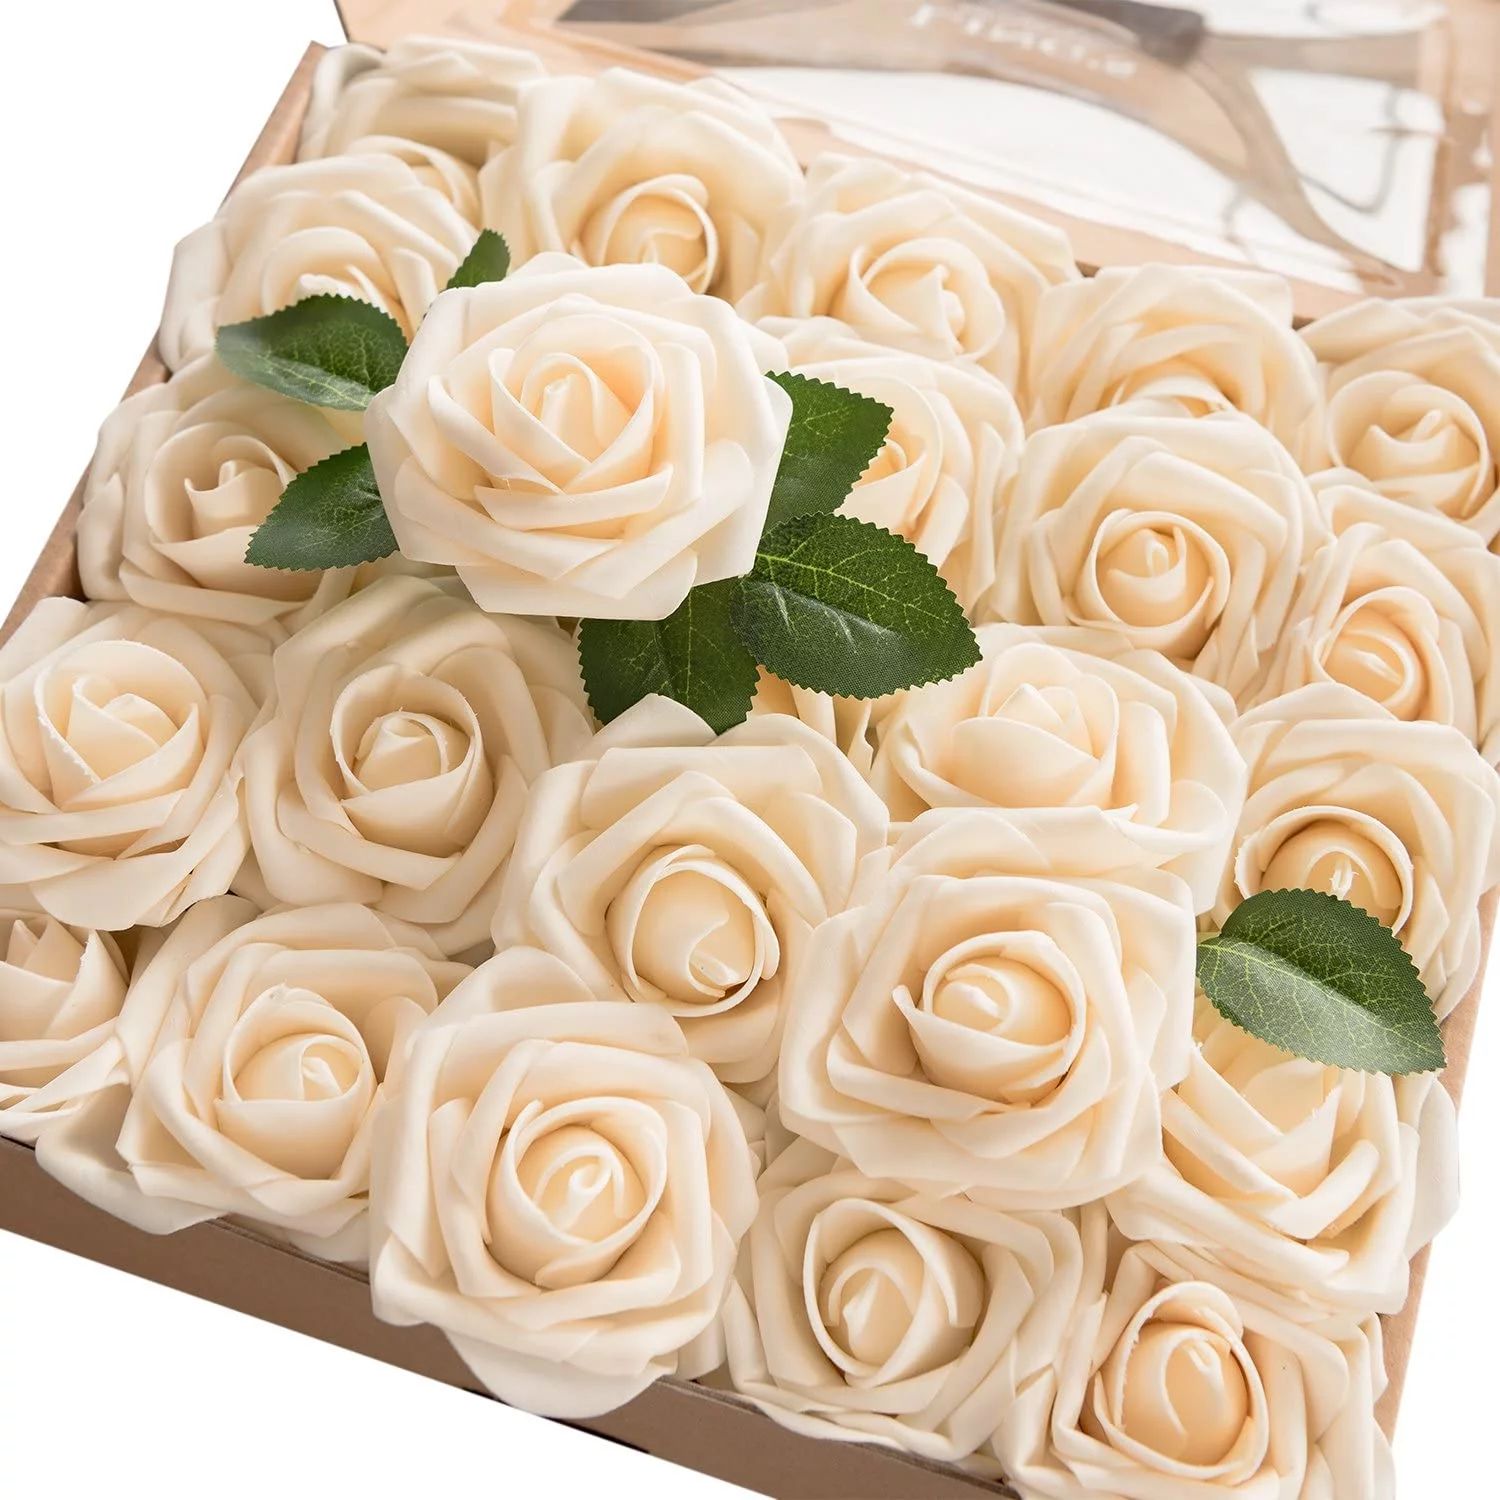 Artificial Flowers 25pcs Real Looking Cream Fake Roses w/Stem for DIY Wedding Bouquets for Bride ... | Walmart (US)